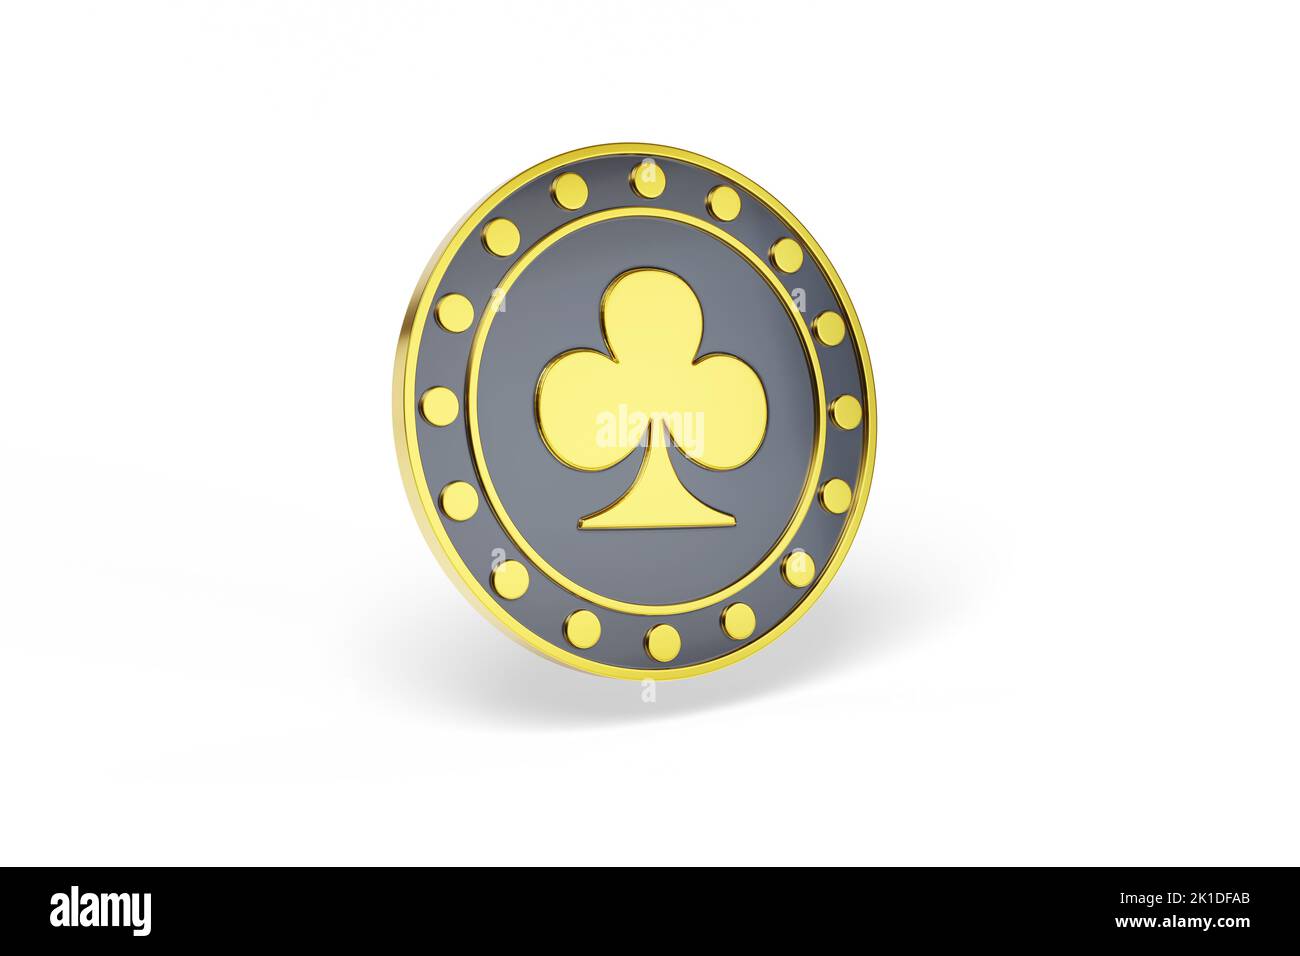 Golden poker chip with the figure of clover isolated on white background. 3d illustration. Stock Photo